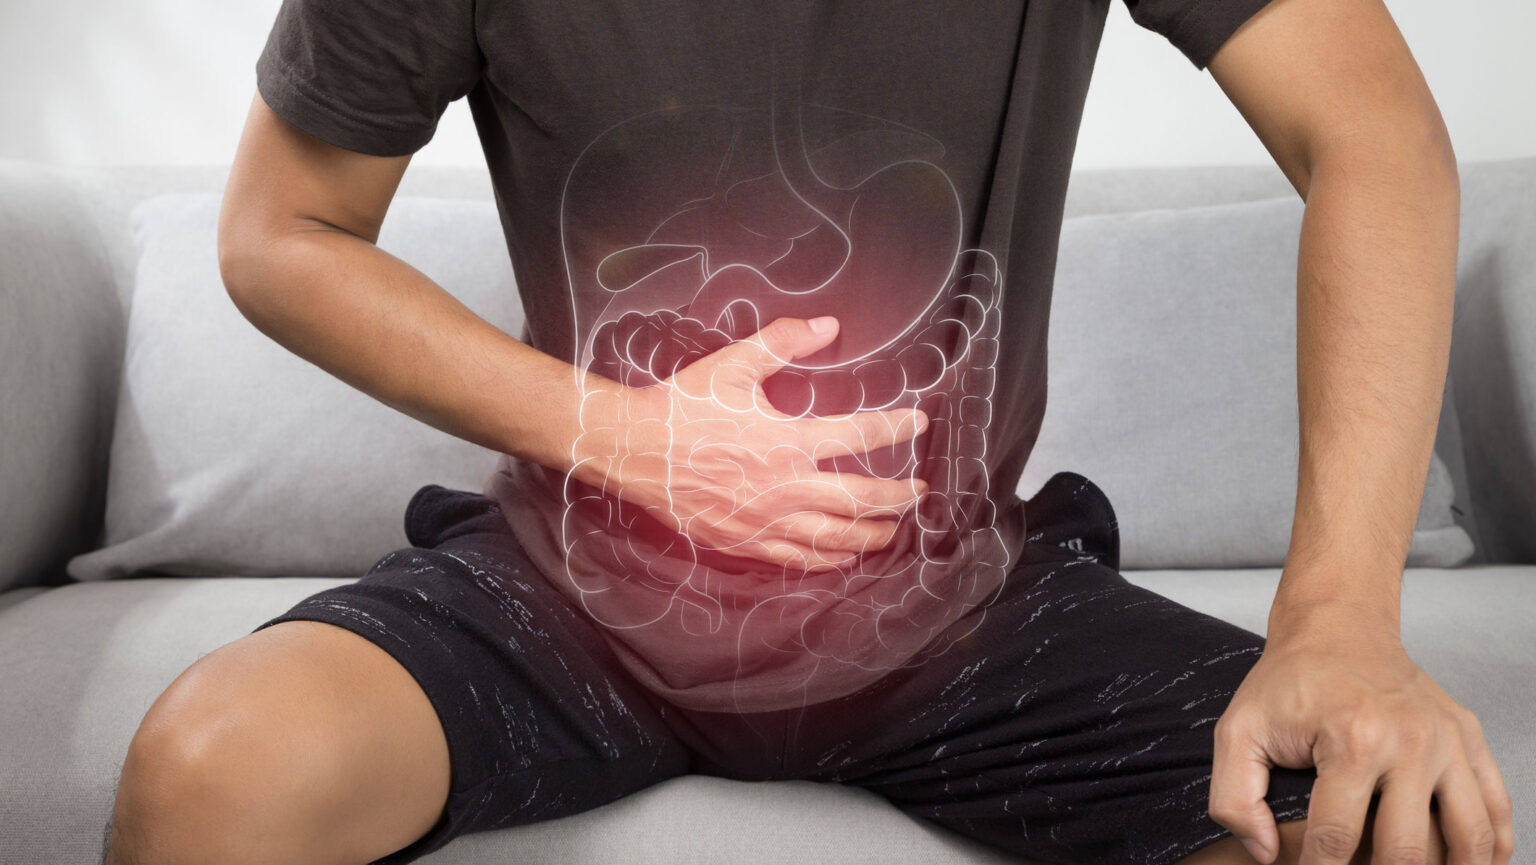 Photo of person with hand on stomach, drawing of digestive system superimposed on top. Image by iStock.